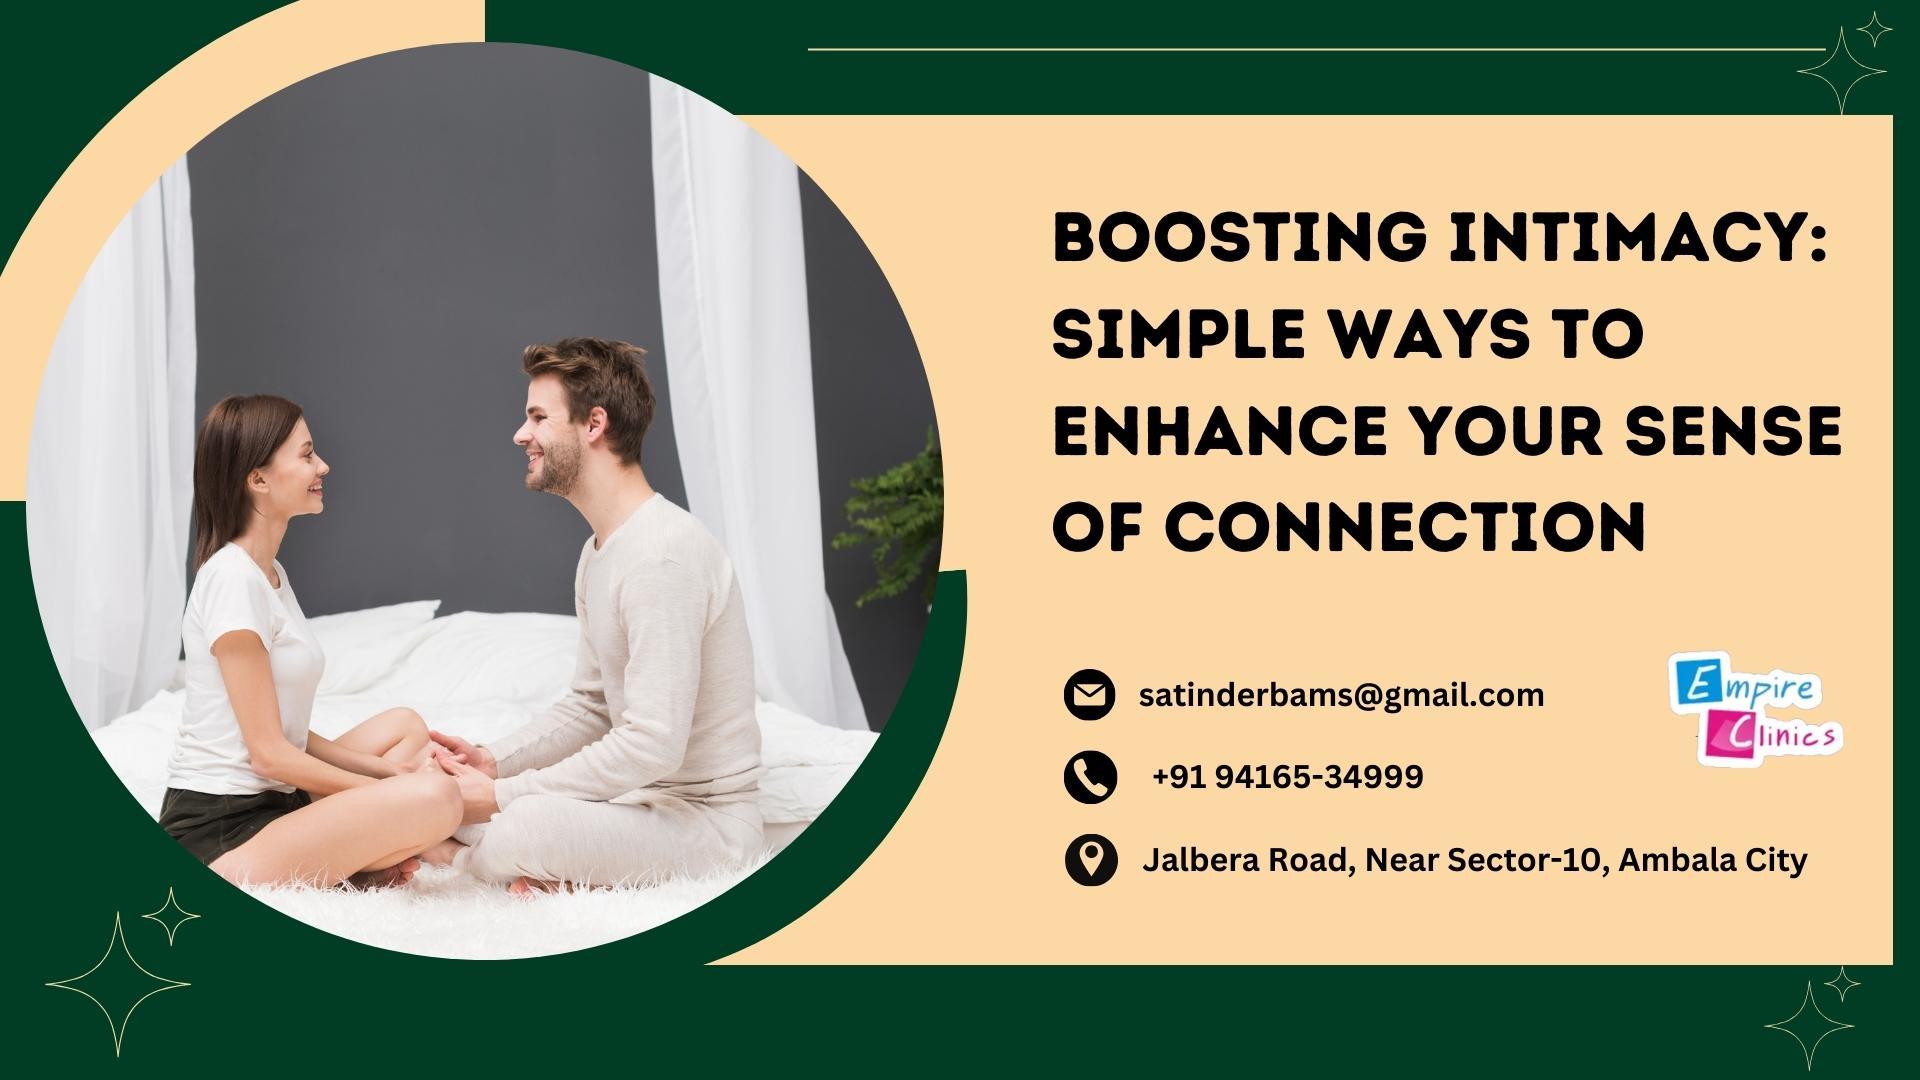 Boosting Intimacy: Simple Ways to Enhance Your Sense of Connection